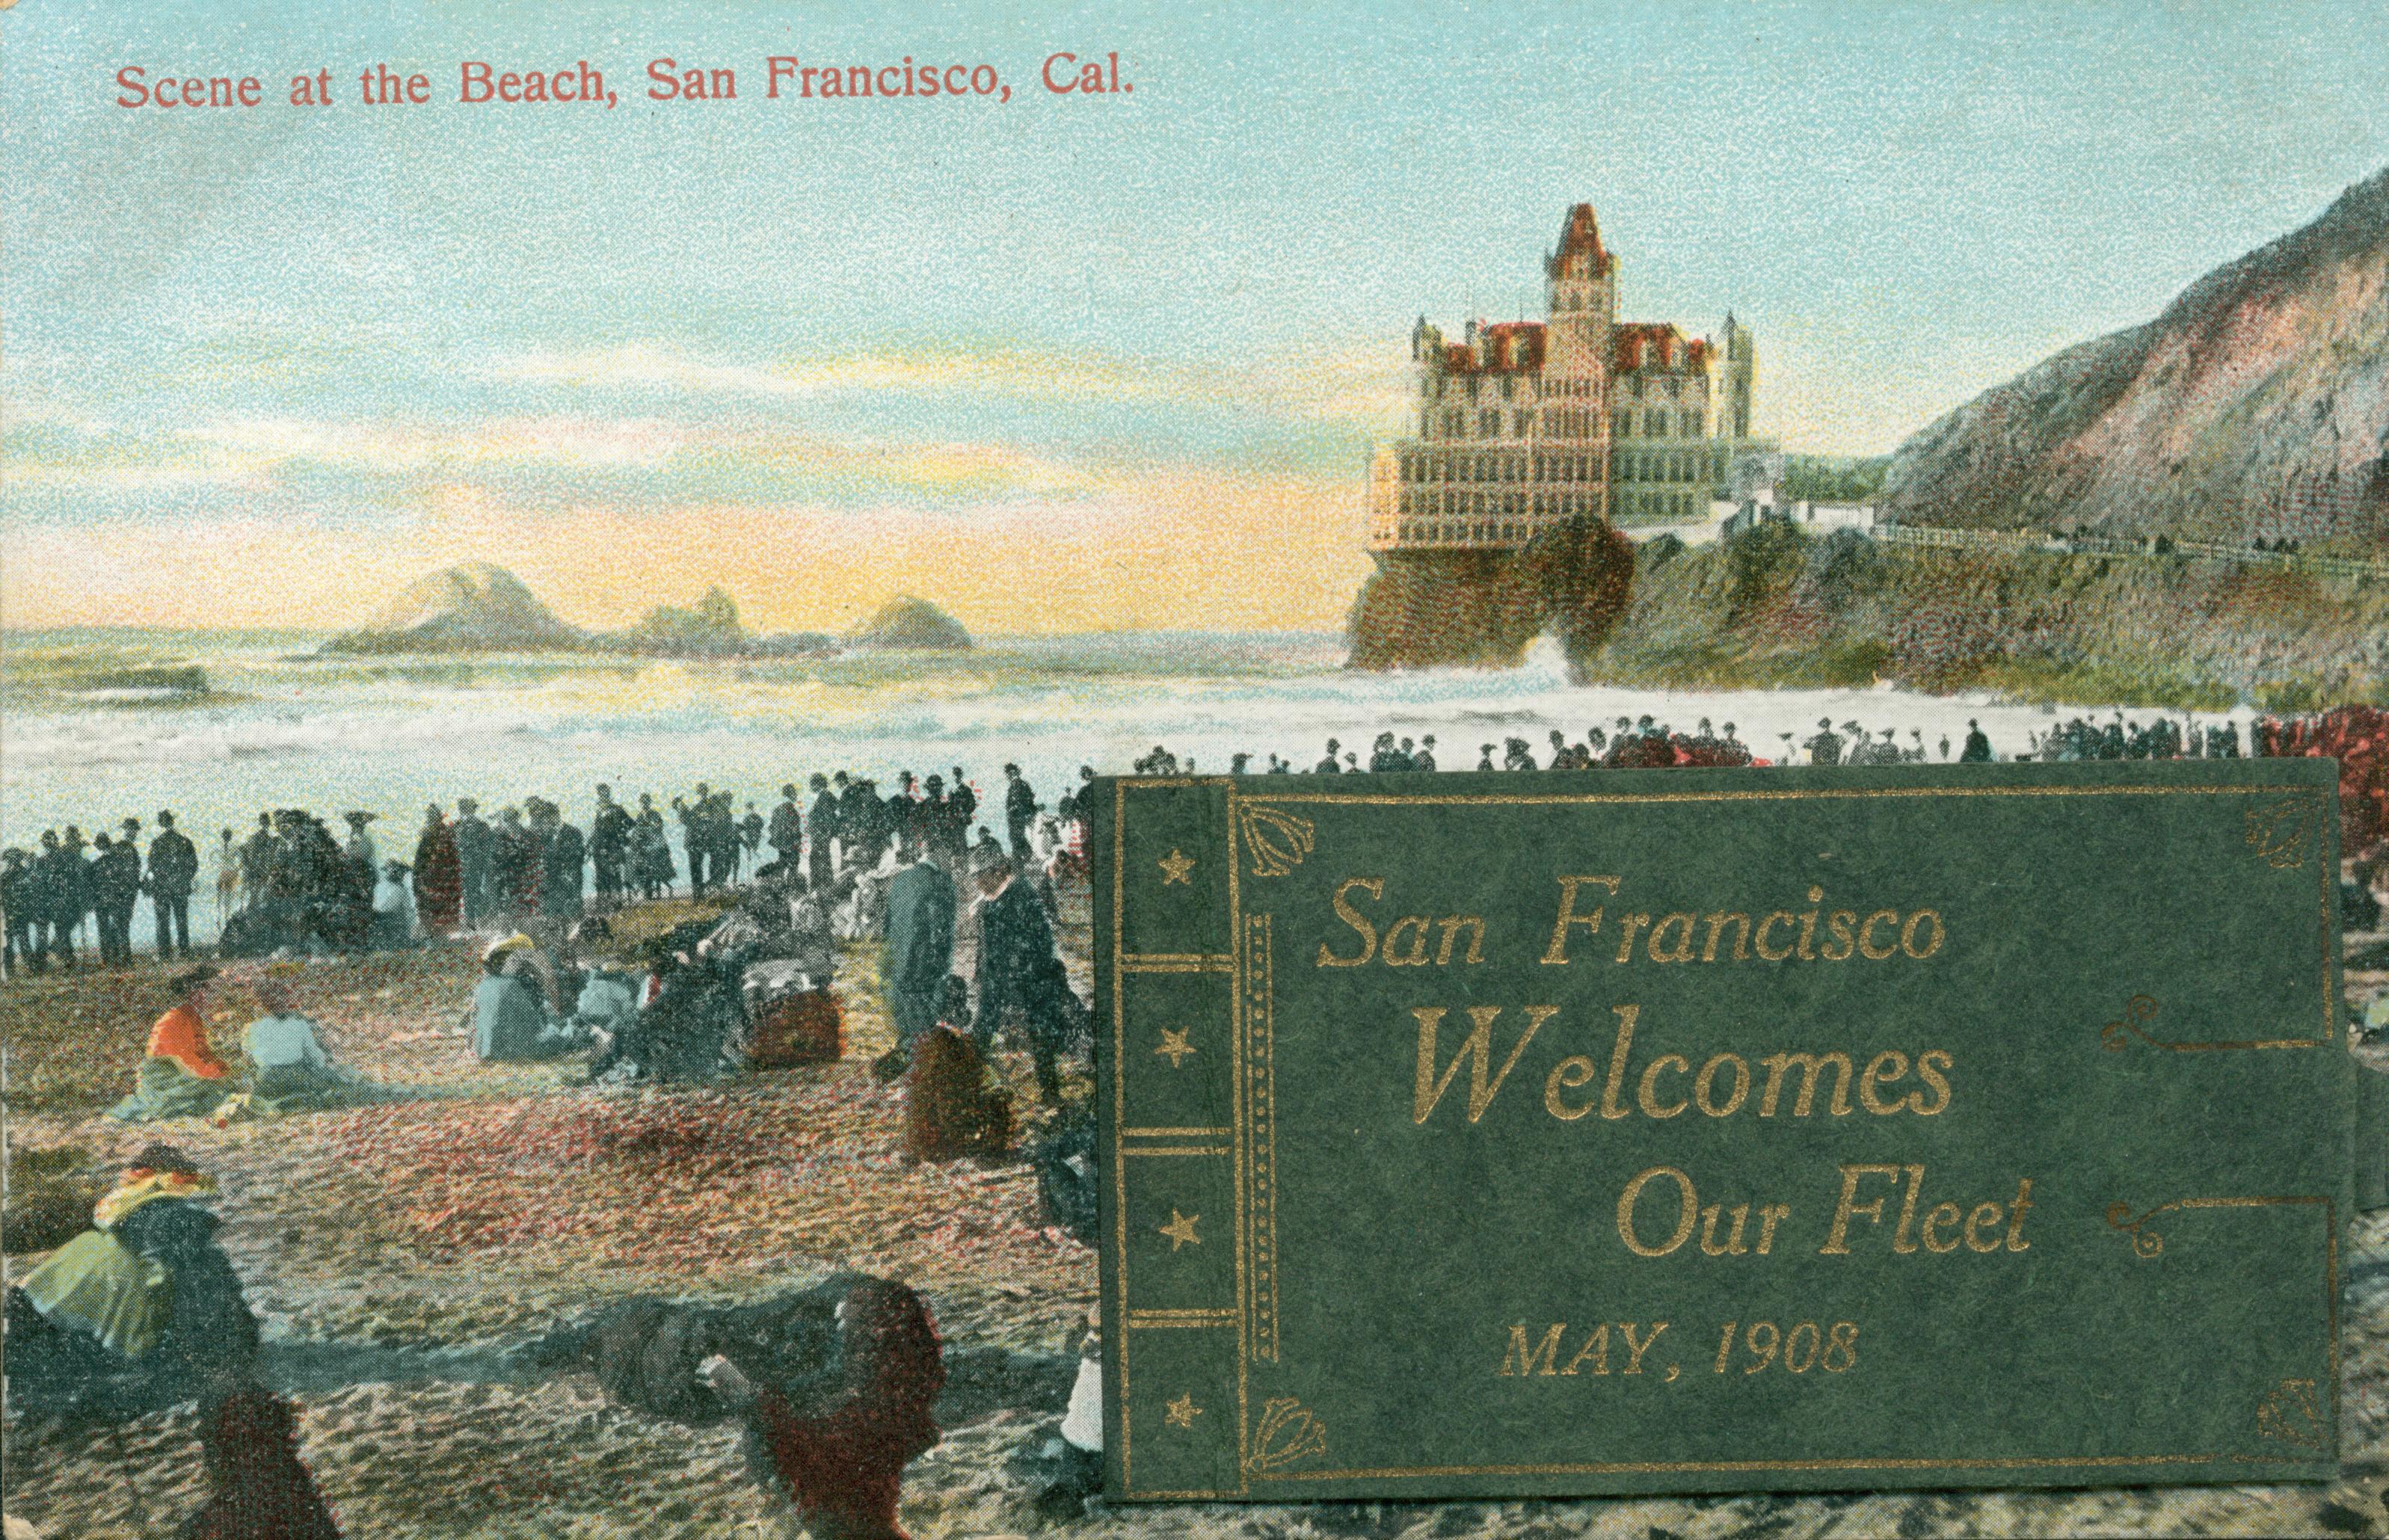 Shows the Cliff House and Seal Rocks, with several individuals on the beach in the foreground, and has a pull-out with images of several US Navy ships